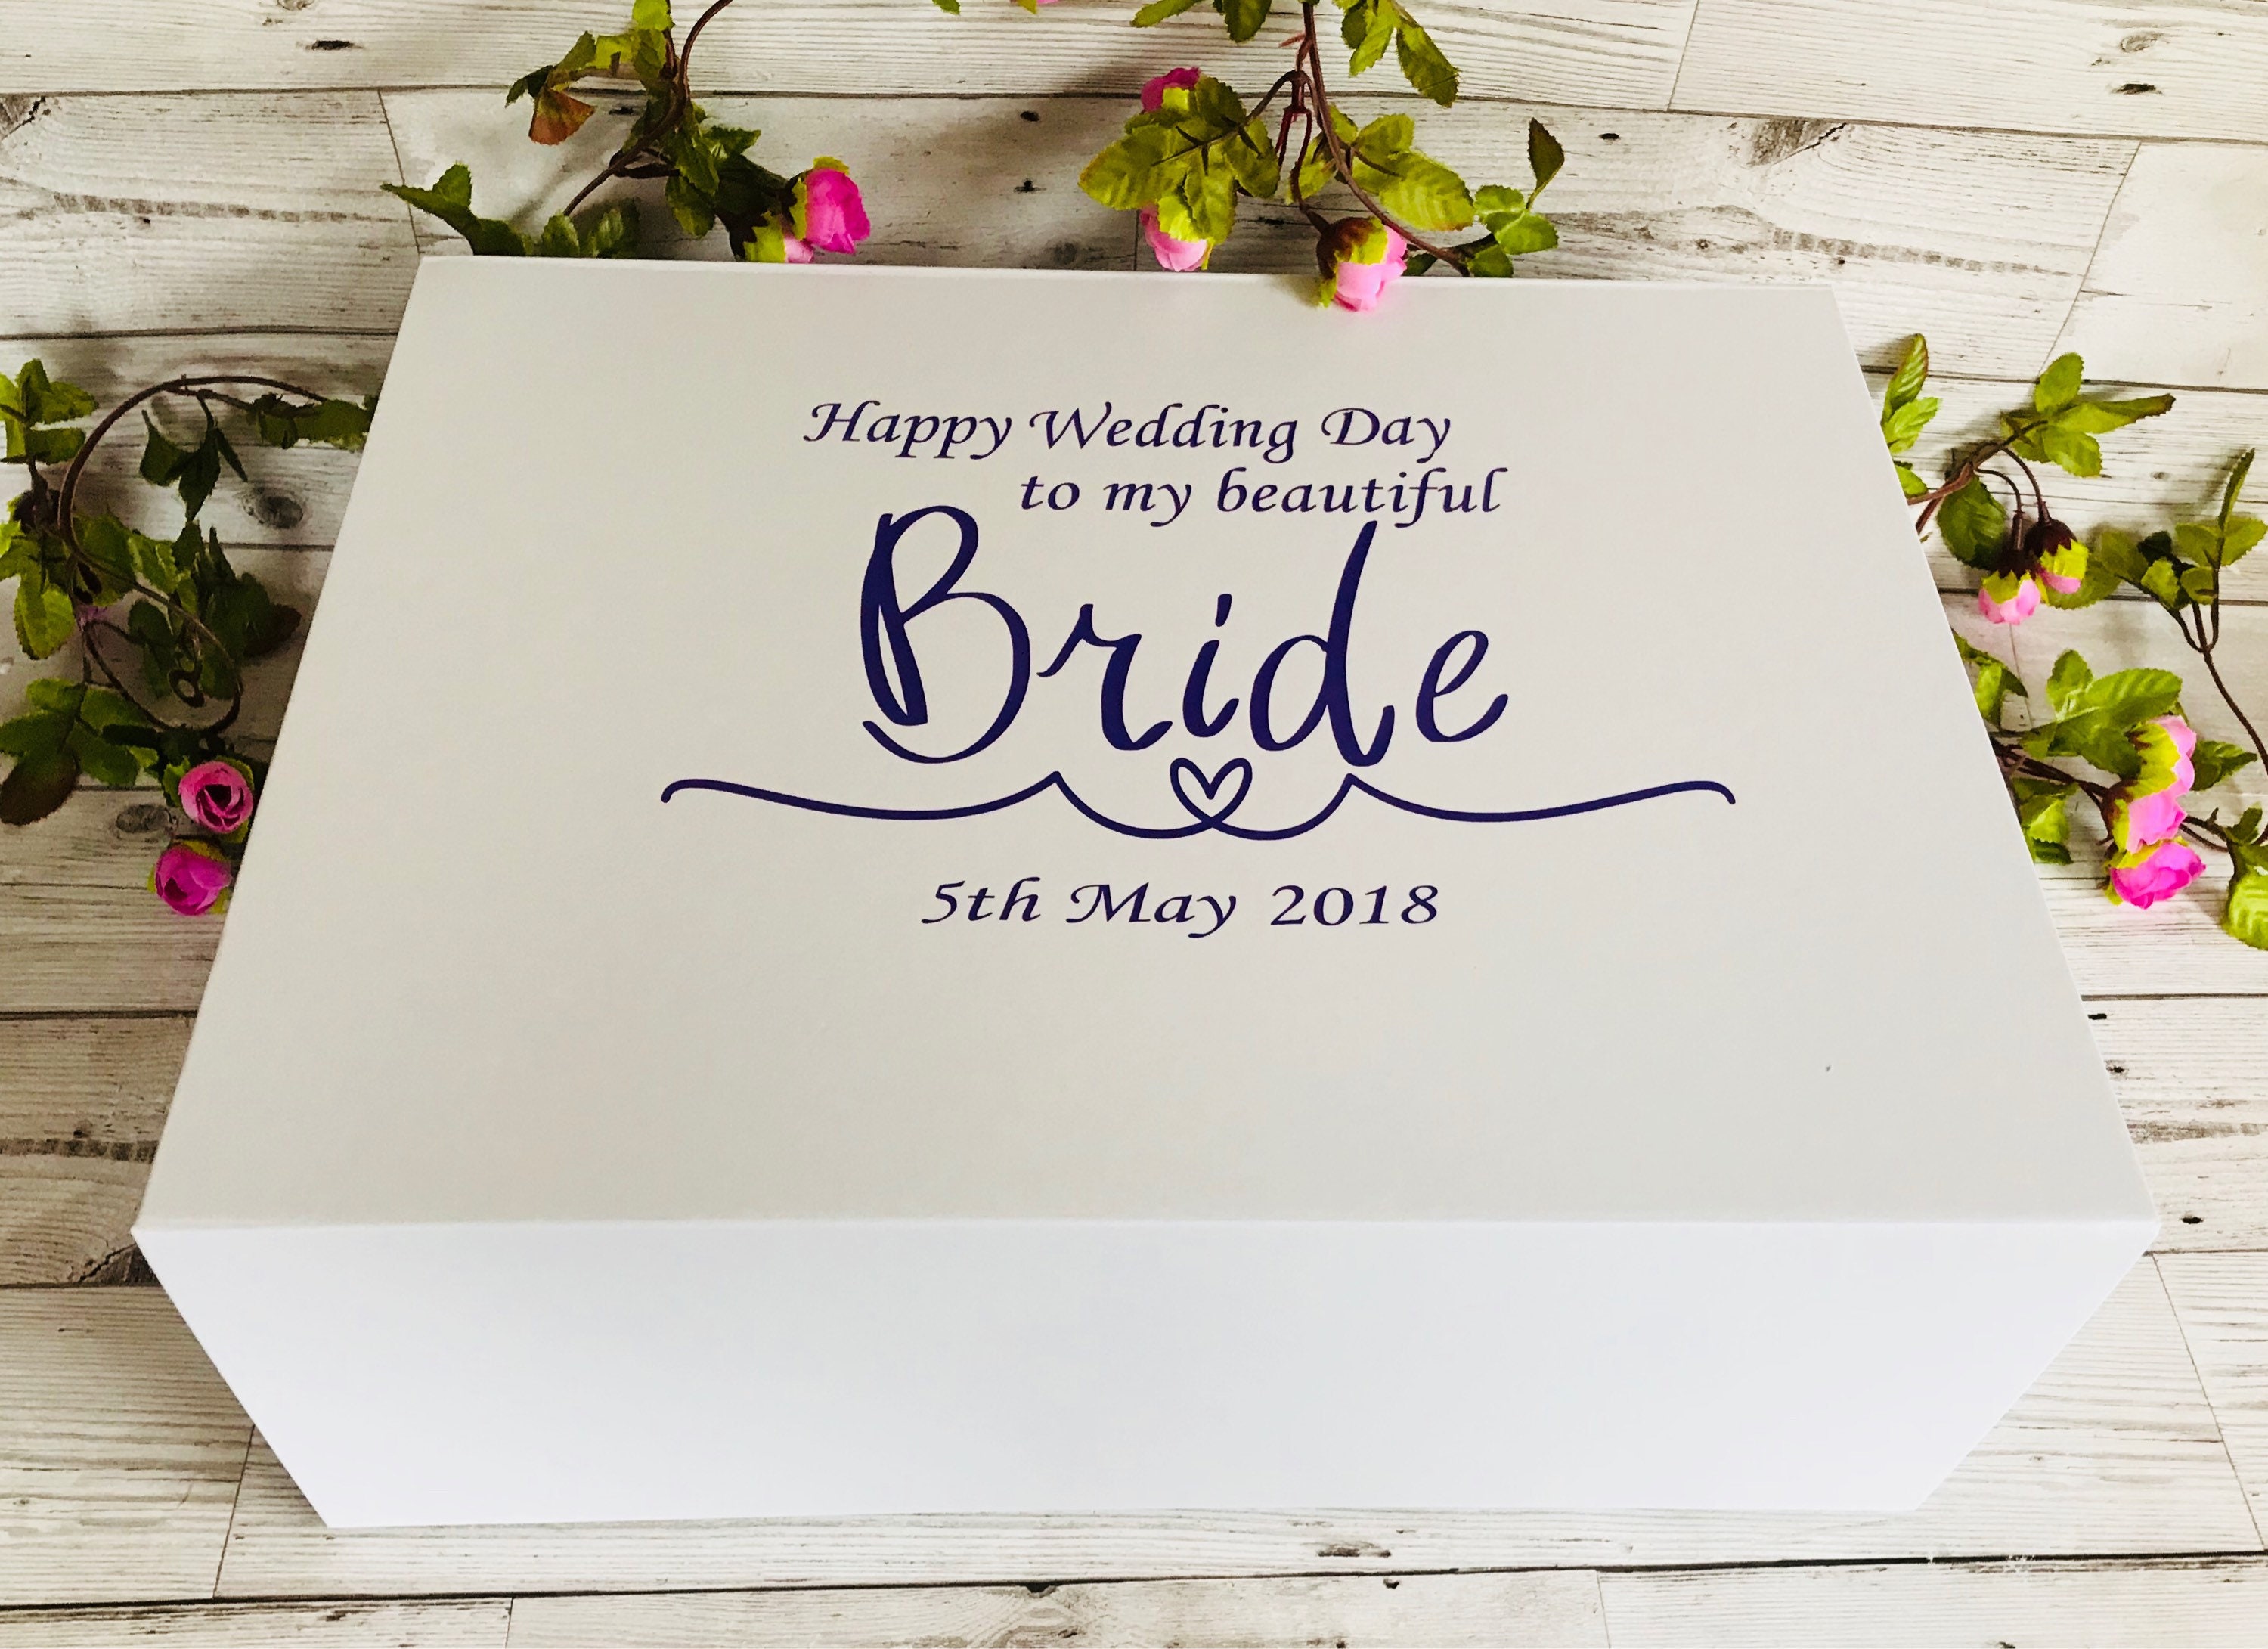 To My Beautiful Bride - Wedding Gift For Bride, Gift For Bri - Inspire  Uplift